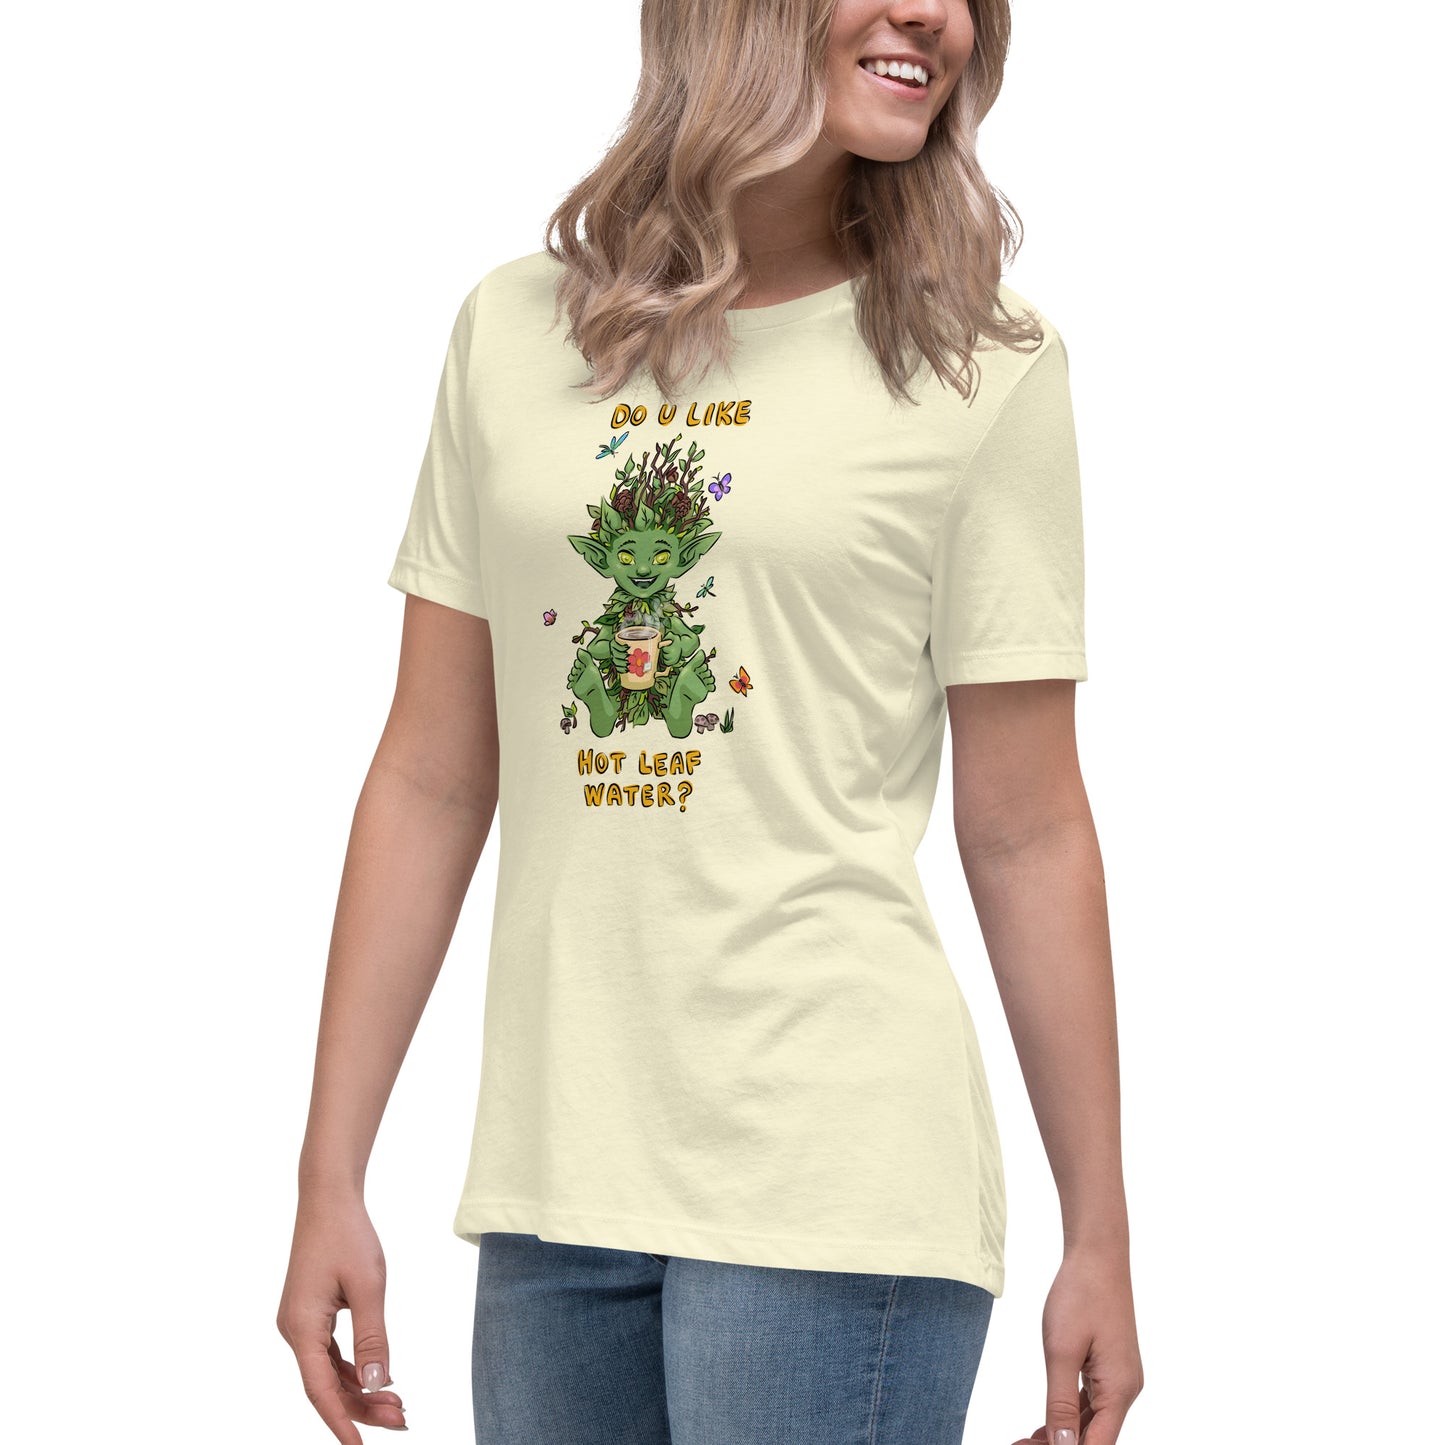 "Hot Leaf Water" Women's Relaxed T-Shirt (The Guild Codex)